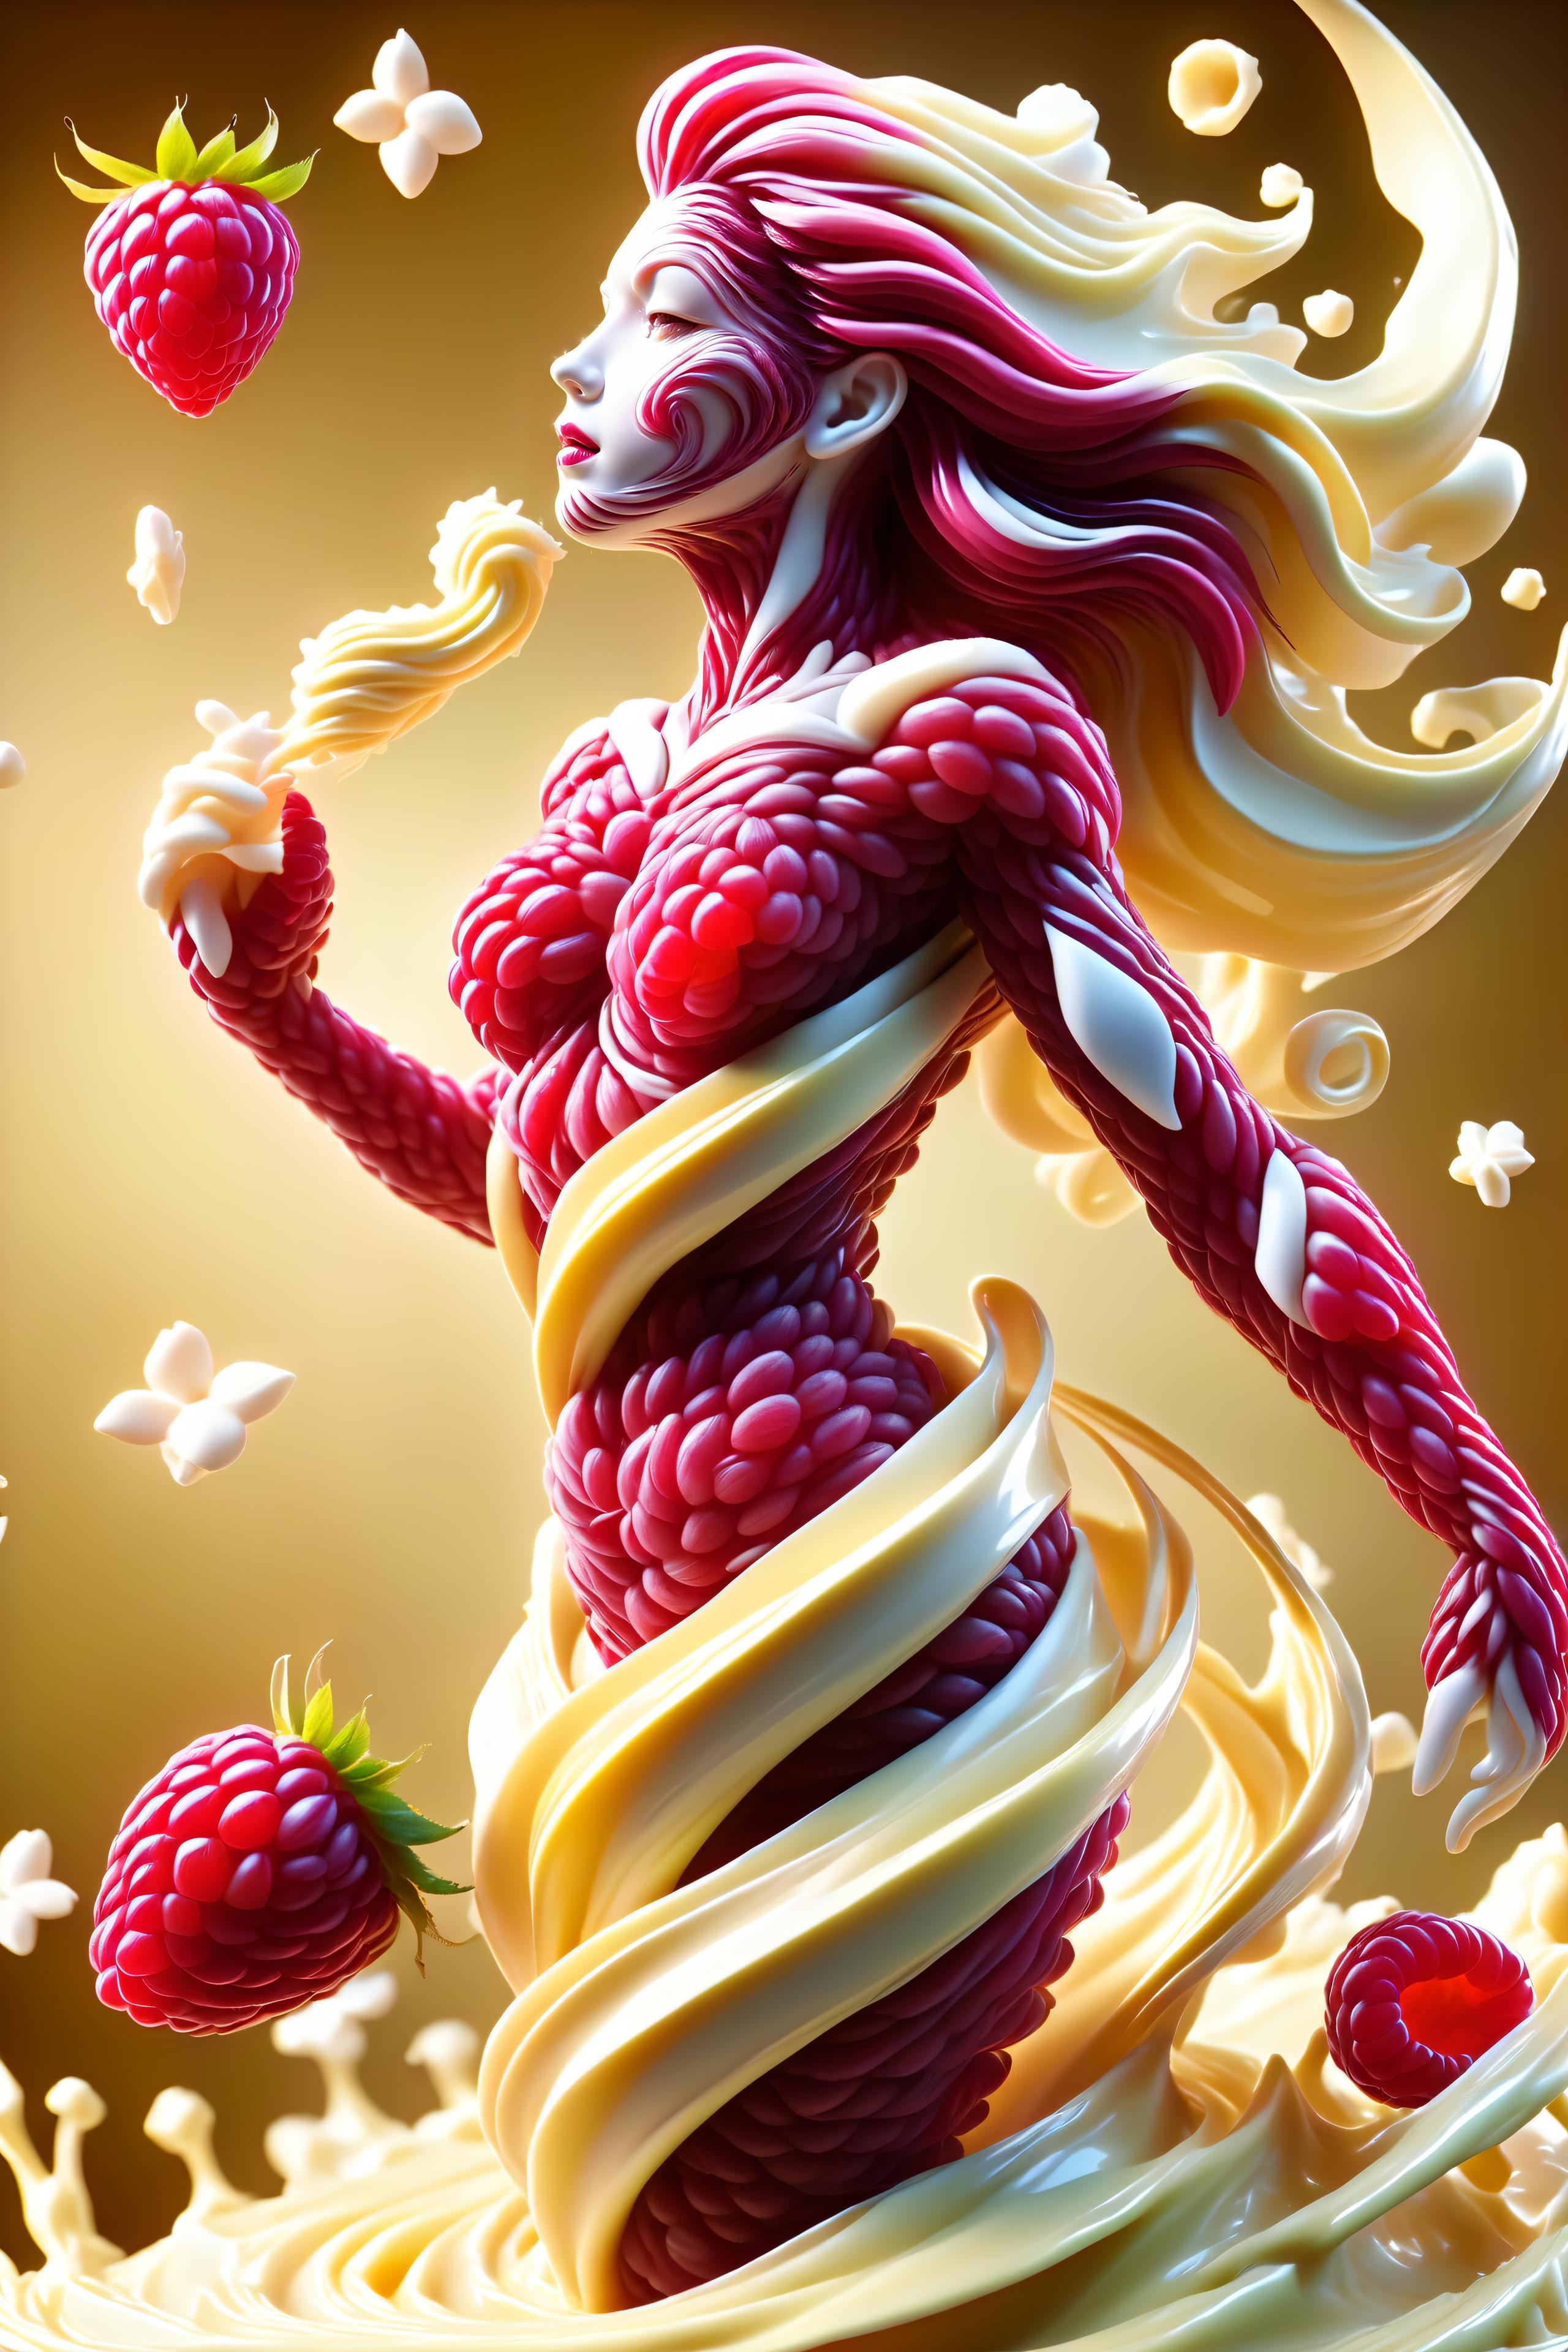 Artistic Statue of a Woman with a Strawberry on Her Head and a Raspberry in Her Hand